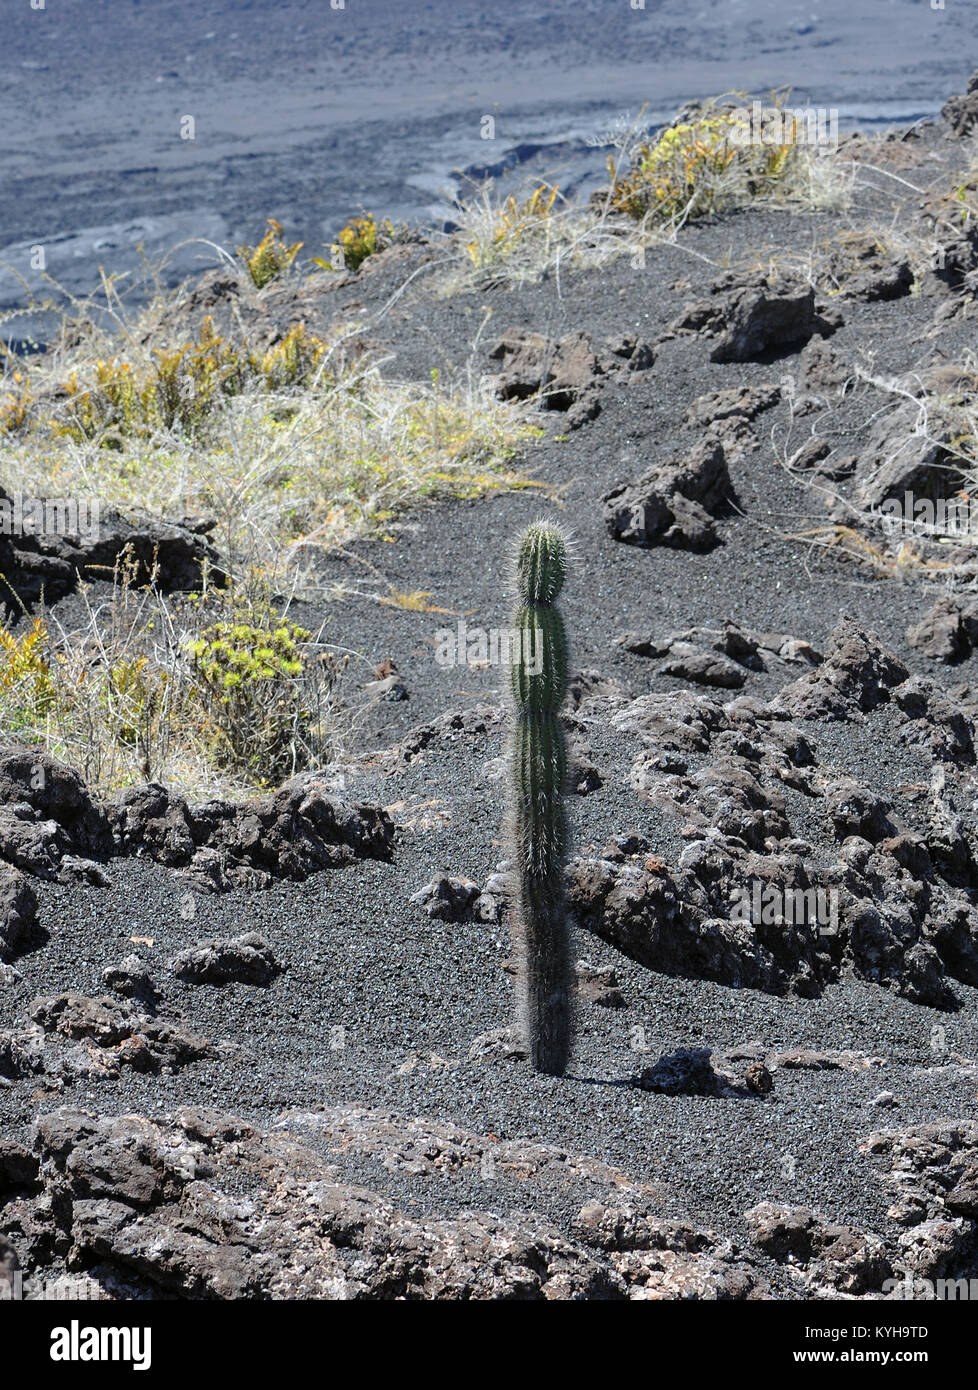 Pioneer species of plants including cacti, ferns and lichens begin to appear on the bare black lava slopes of the volcano Volcan Chico after the 1979 Stock Photo